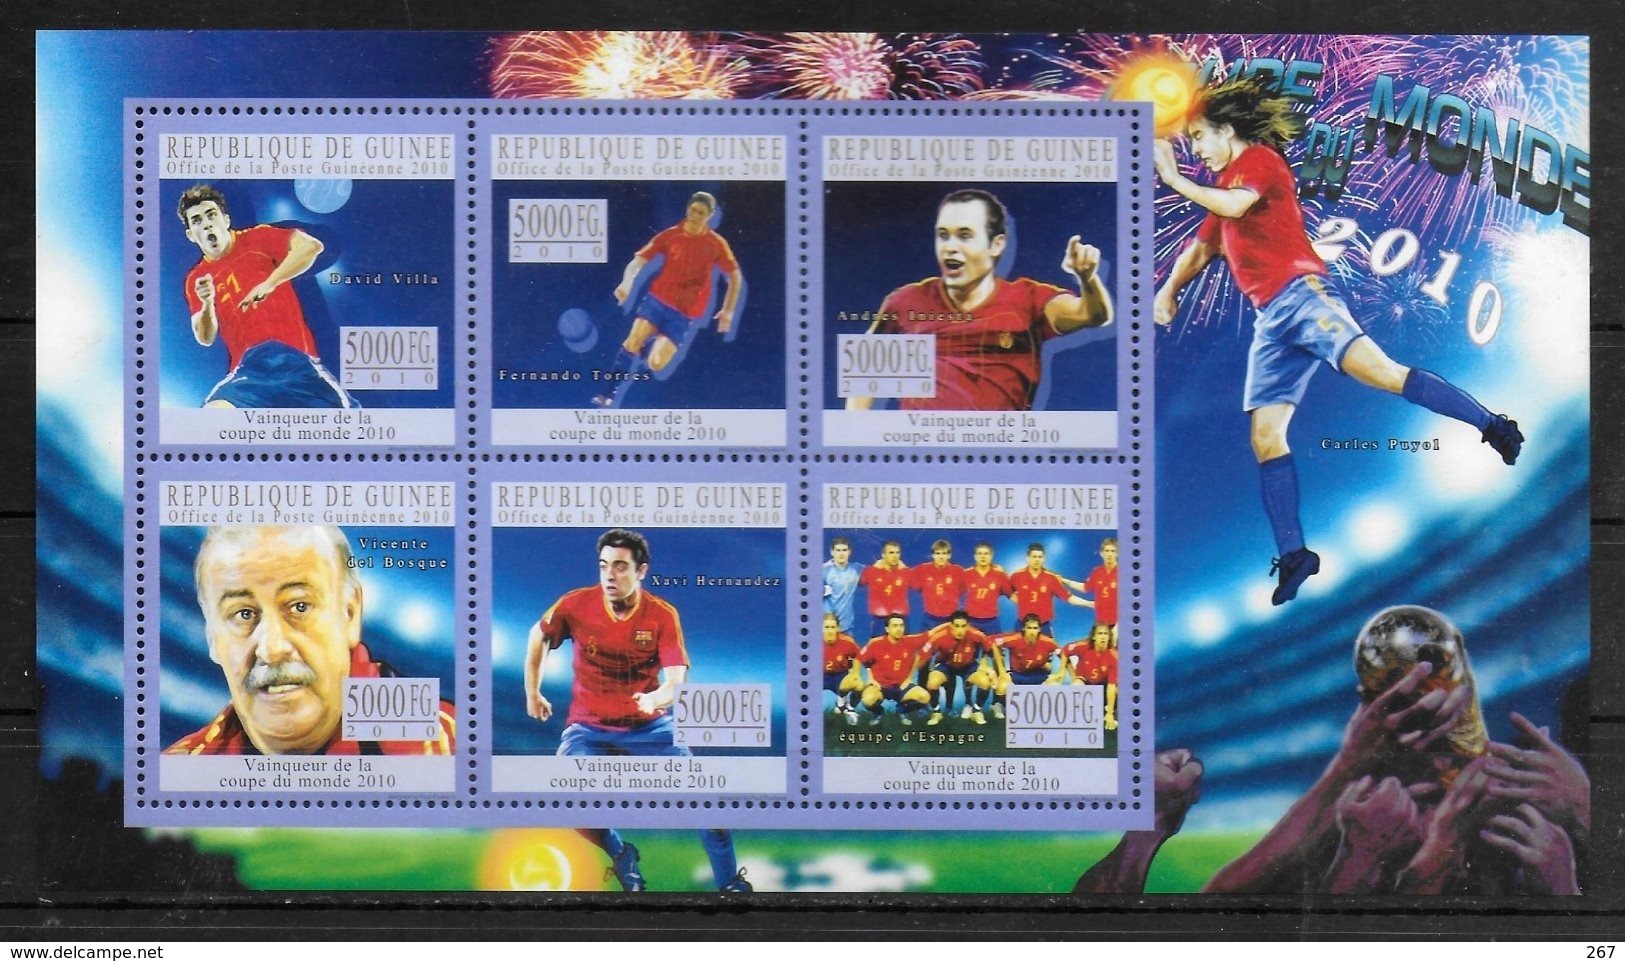 GUINEE  Feuillet   N°  5032/37  * *  ( Cote 15e ) Cup 2010 Football  Soccer  Fussball  Espagne - 2010 – South Africa